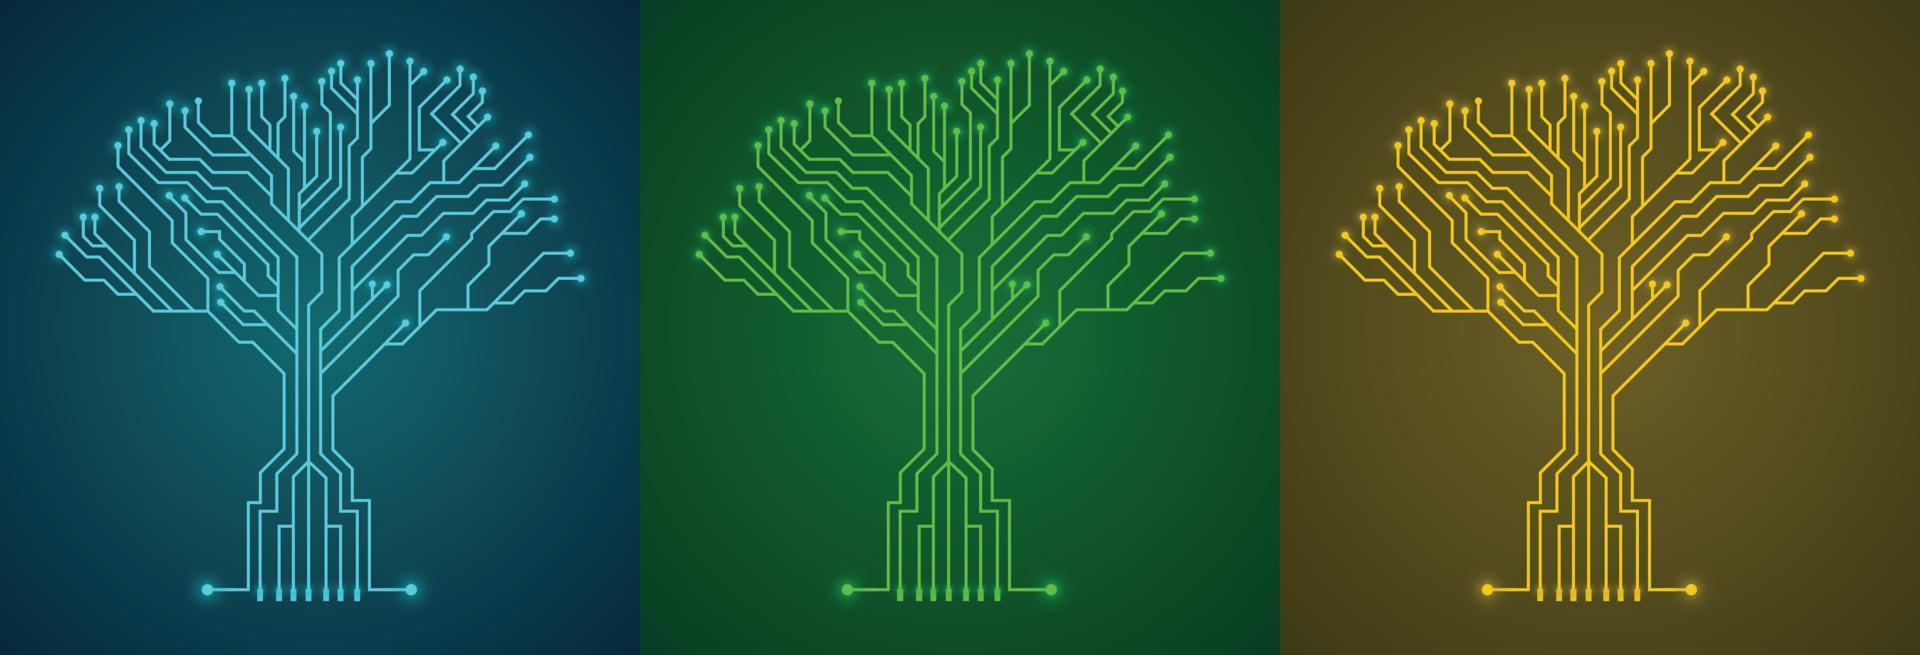 Circuit board tree set with different colors, technology background concept vector illustration